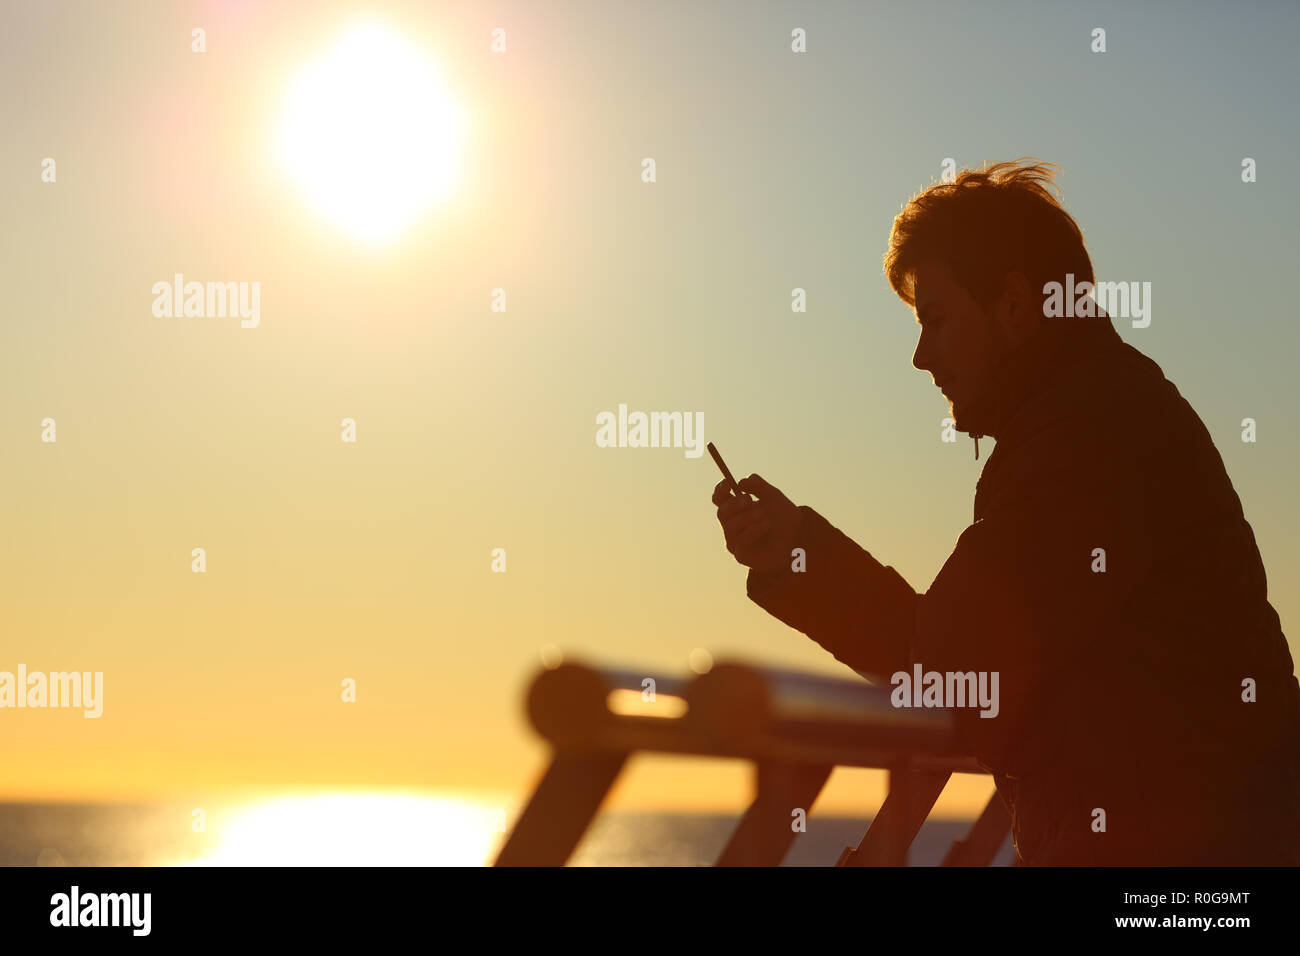 Side view portrait of a silhouette of a man using a phone at sunset Stock Photo